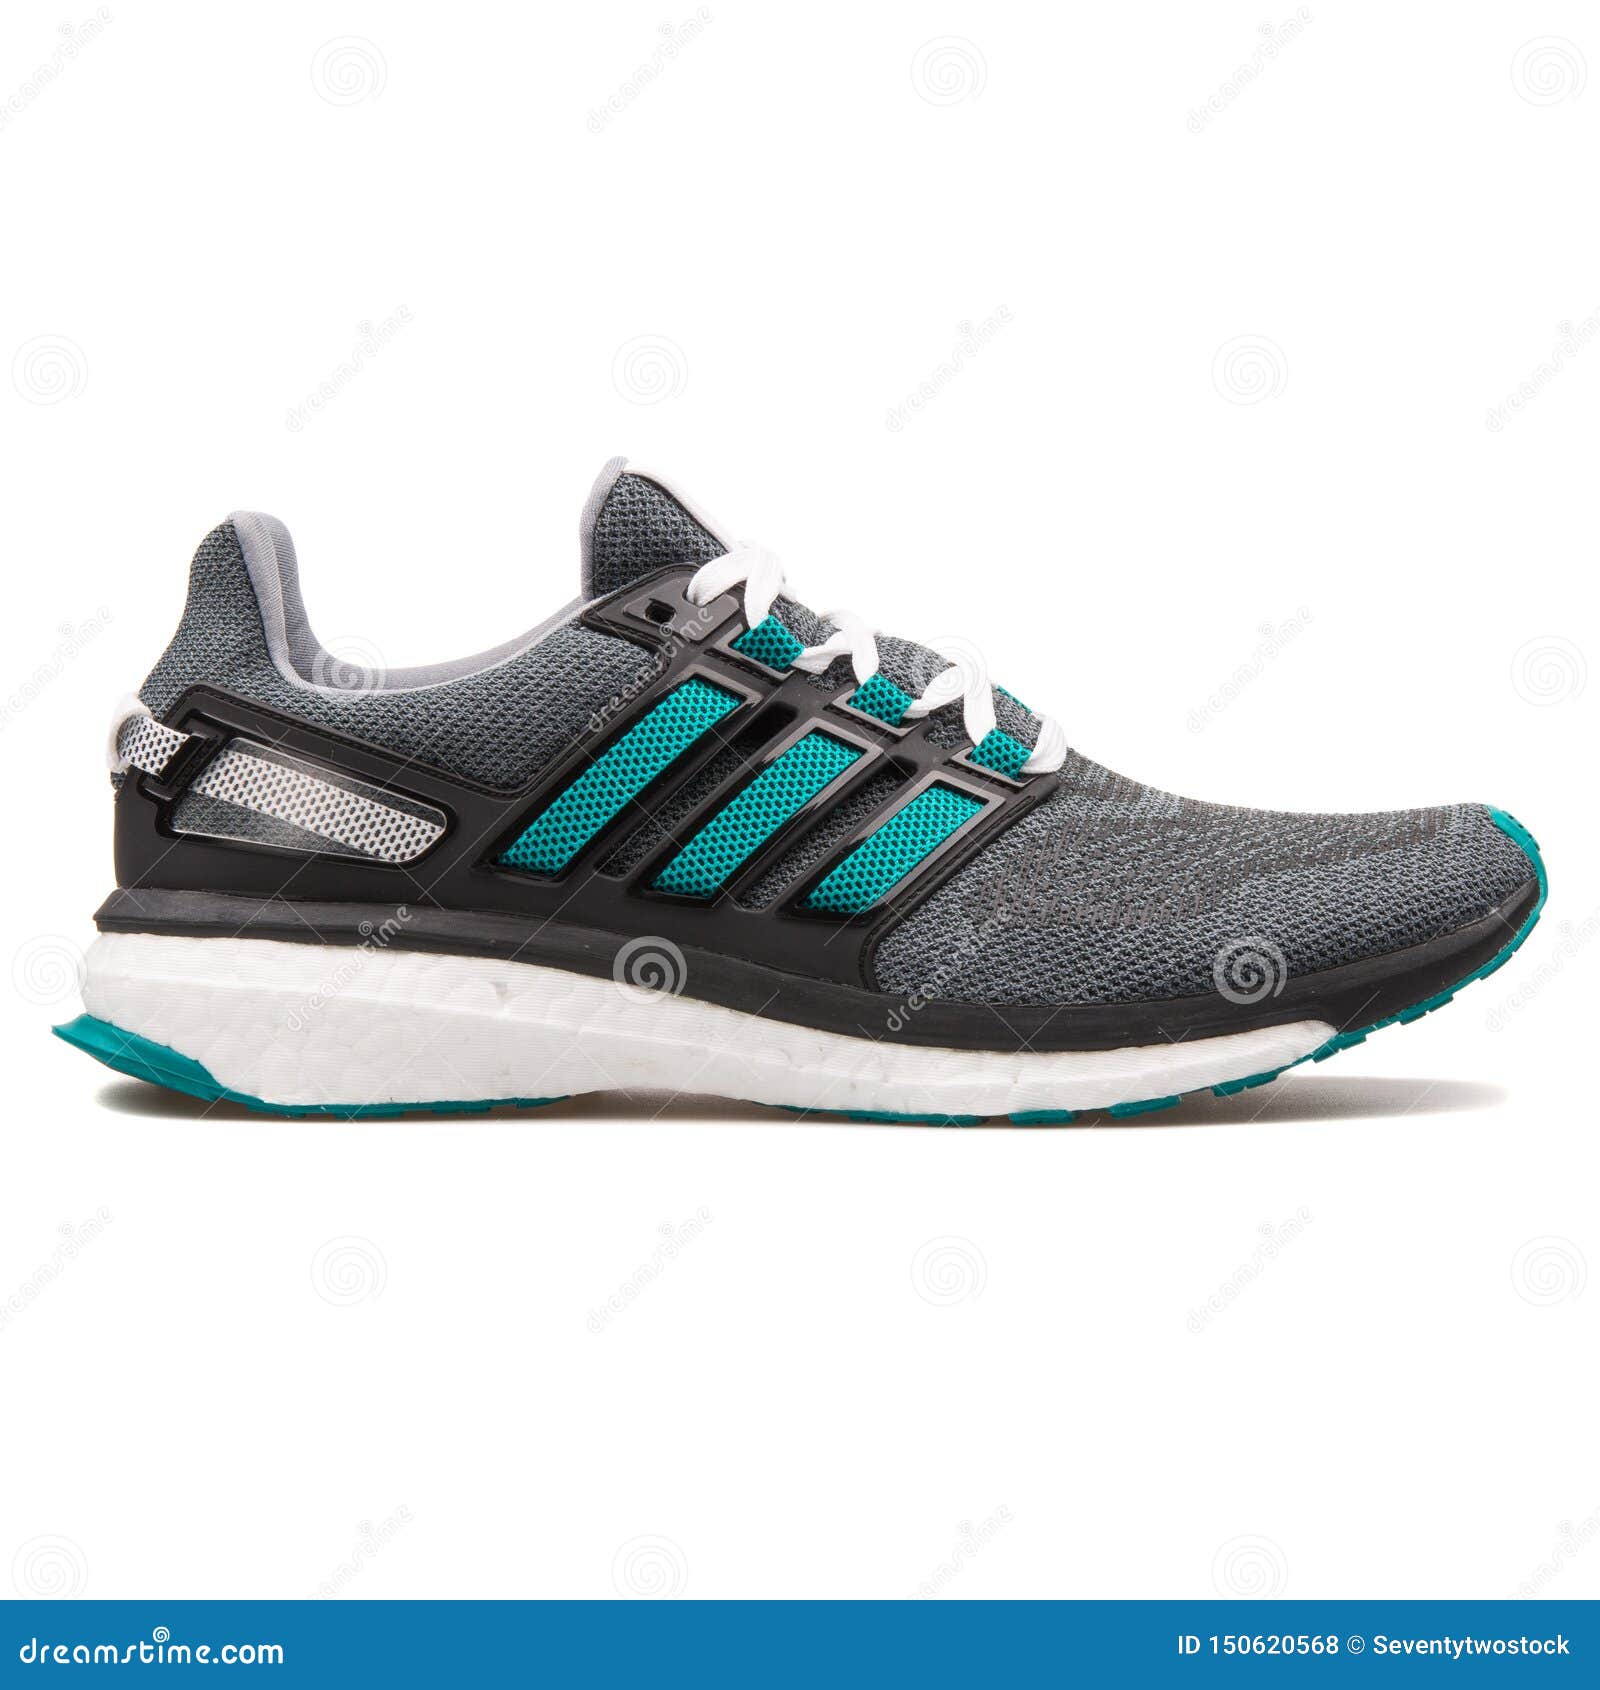 Adidas Energy Boost 3 Black, Grey and Green Editorial Stock Photo - Image of colour: 150620568